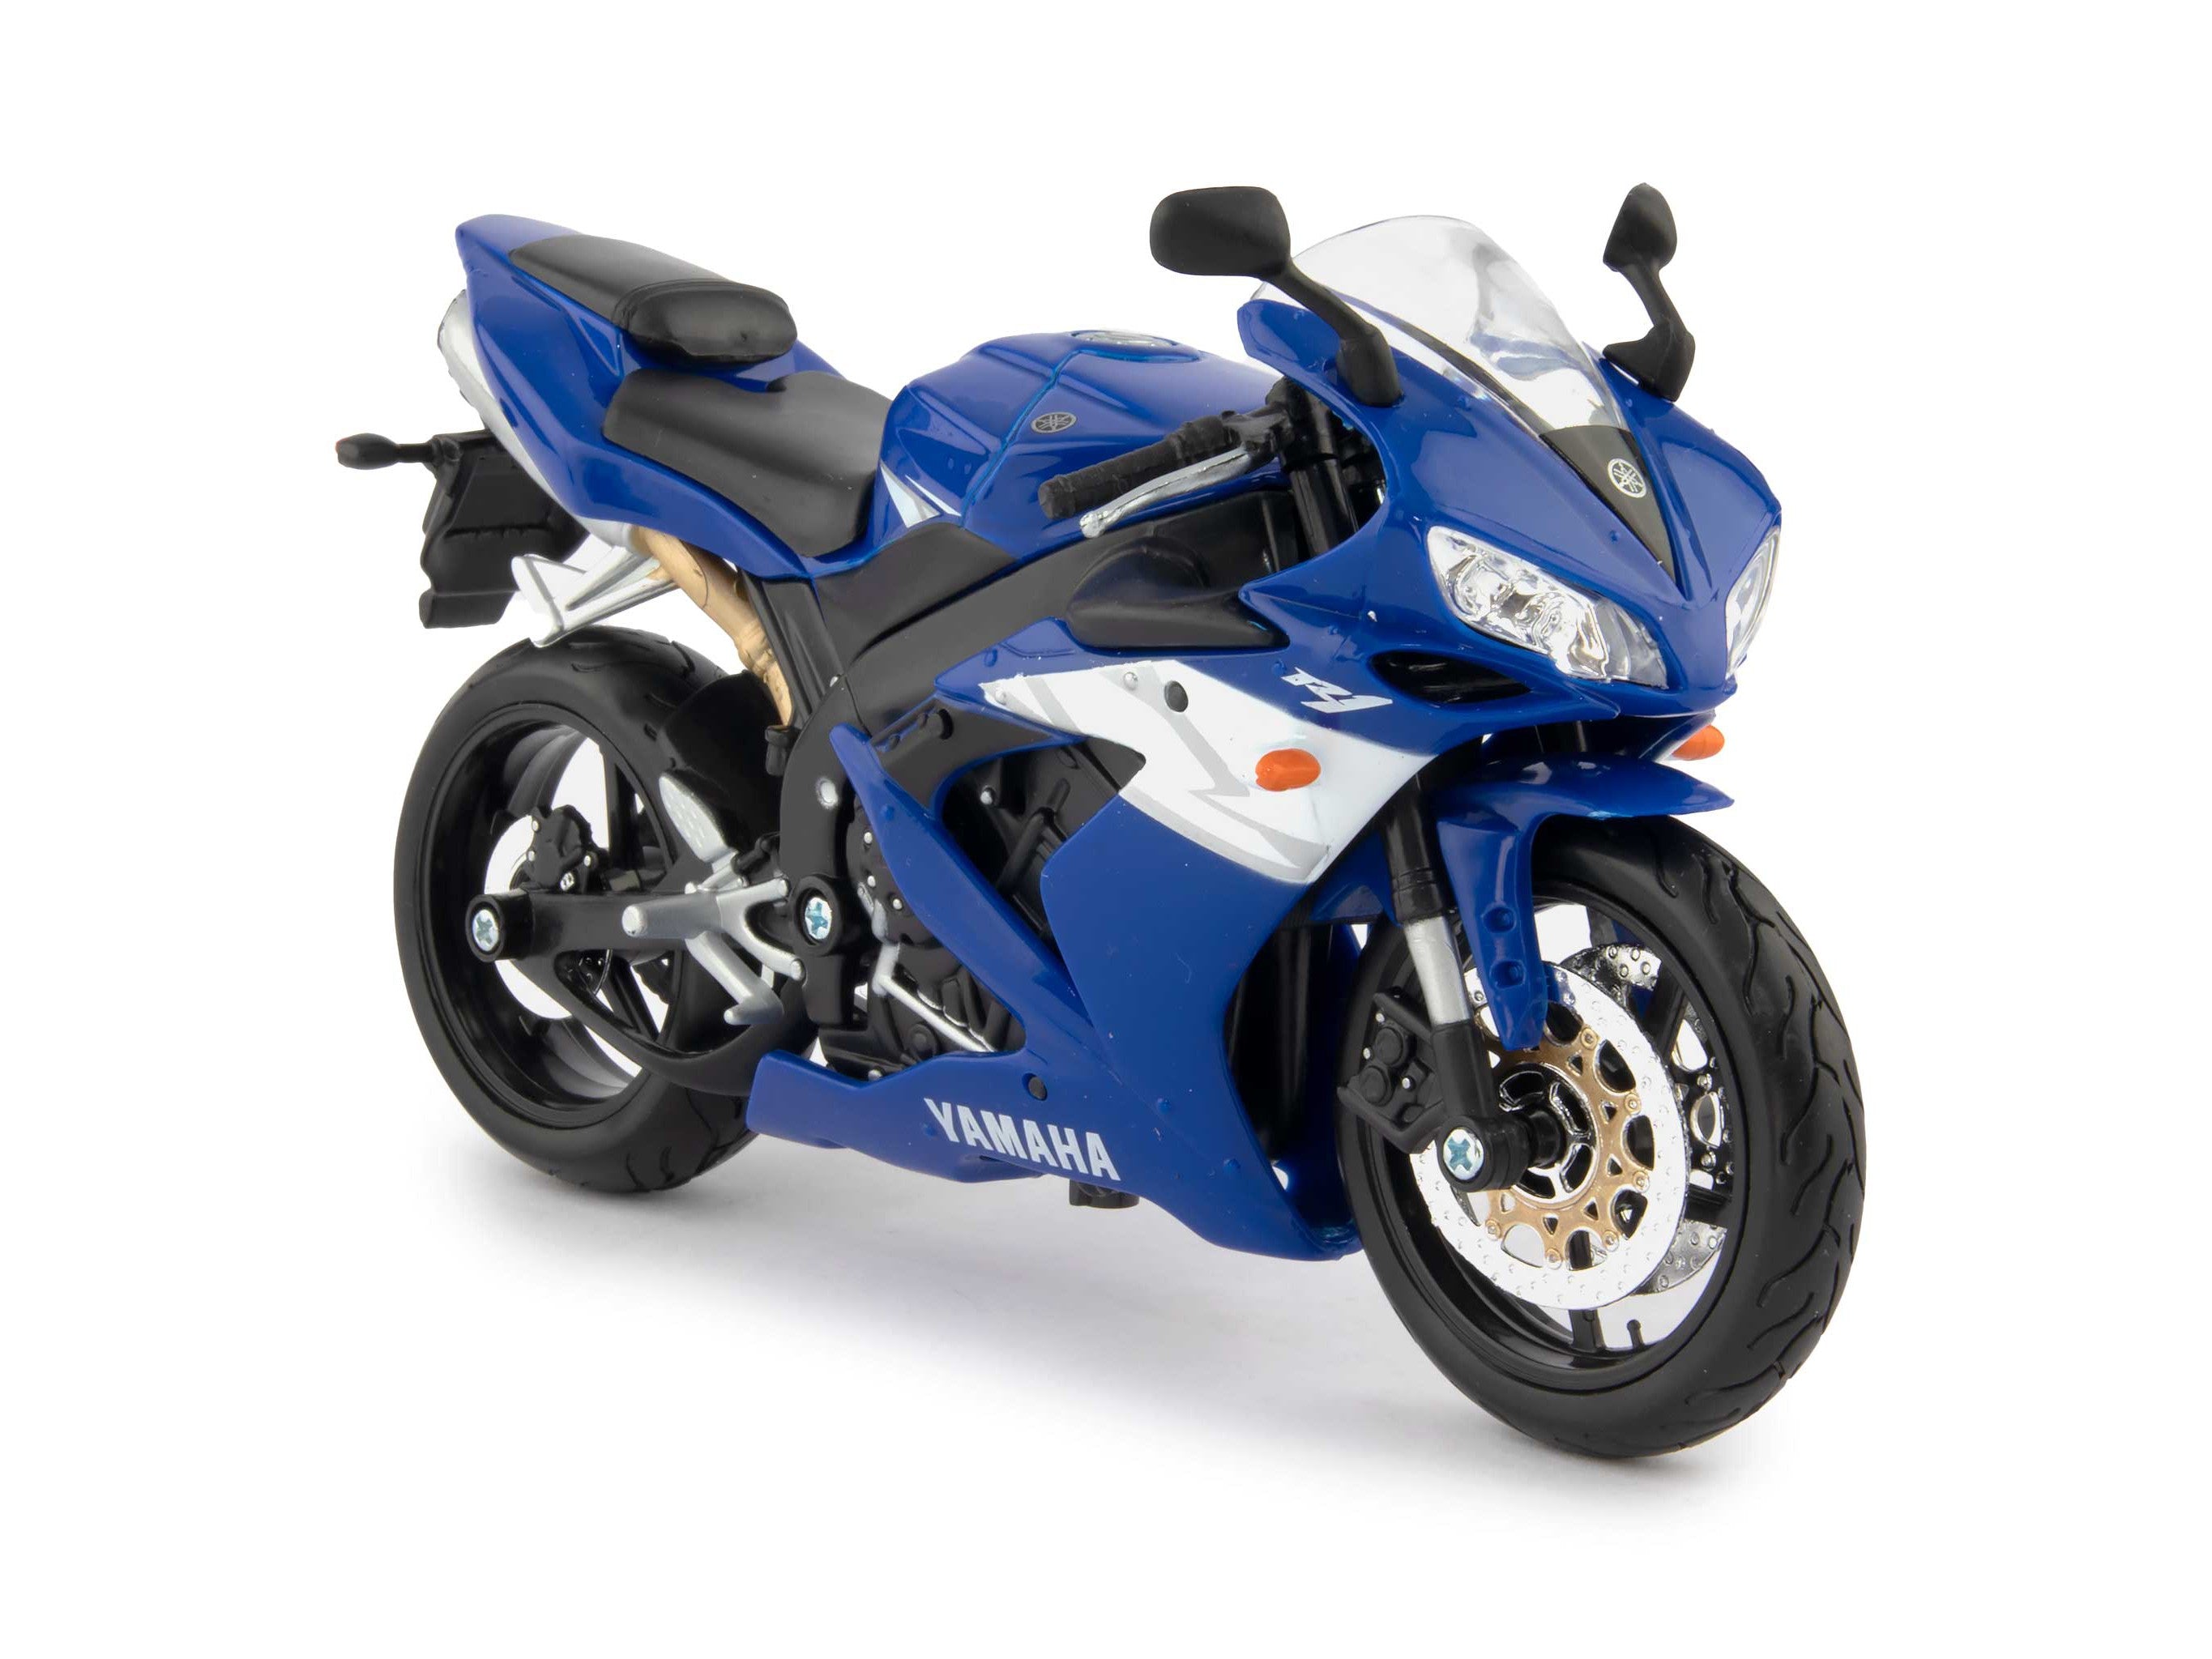 Yamaha YZF-R1 2006 blue - 1:12 Scale Diecast Model Motorcycle